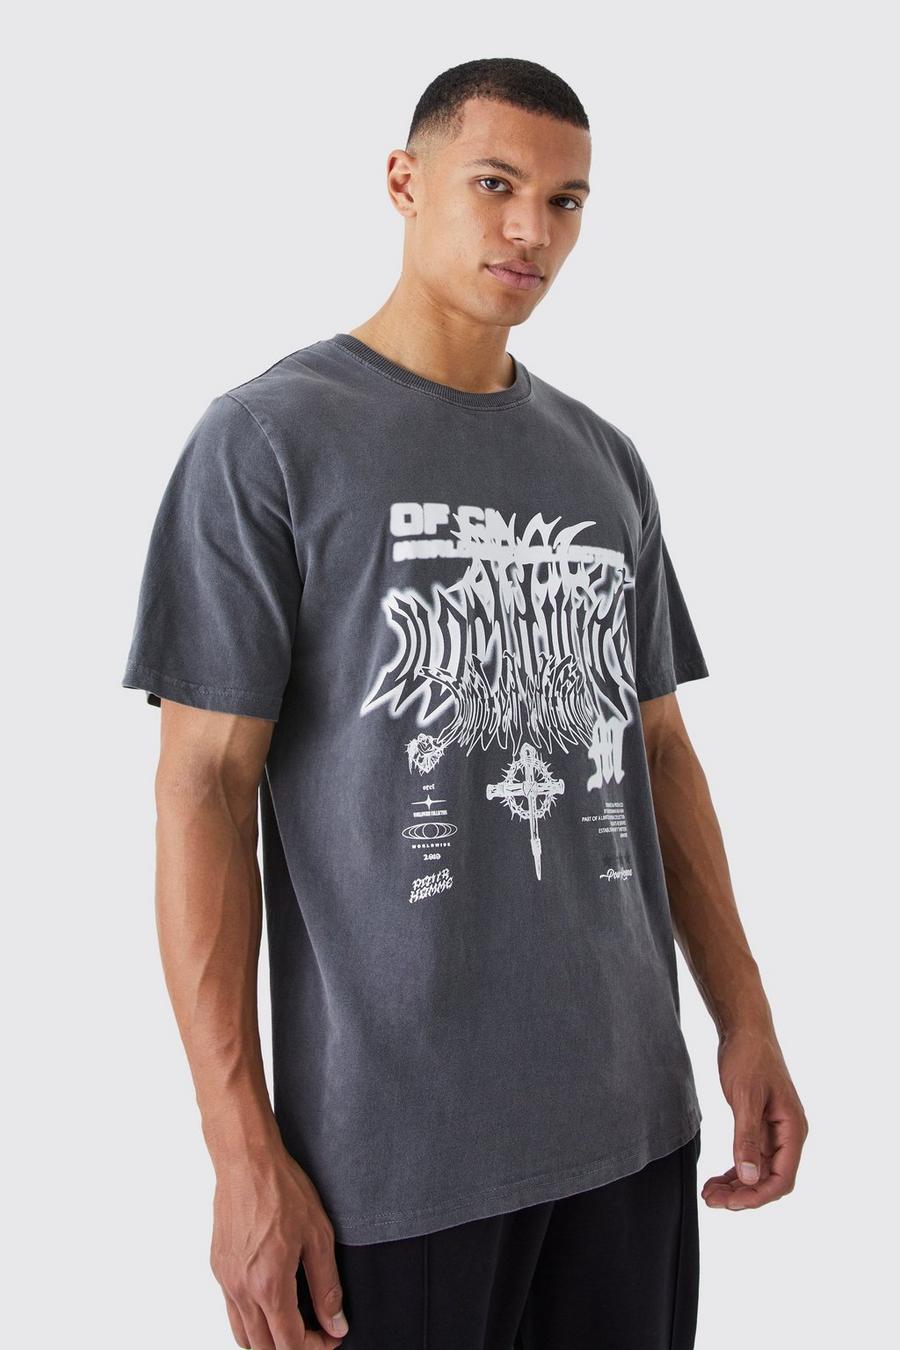 Charcoal gris Tall Oversized Overdyed Gothic Graphic T-shirt